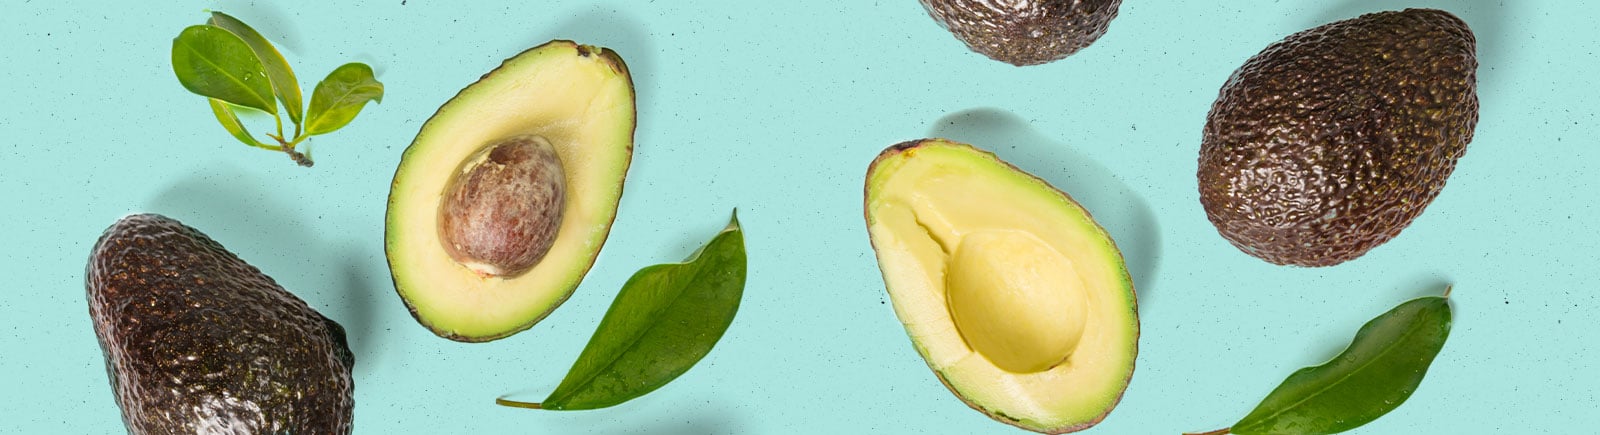 header image of avocados cut in half, some with pit some without a pit